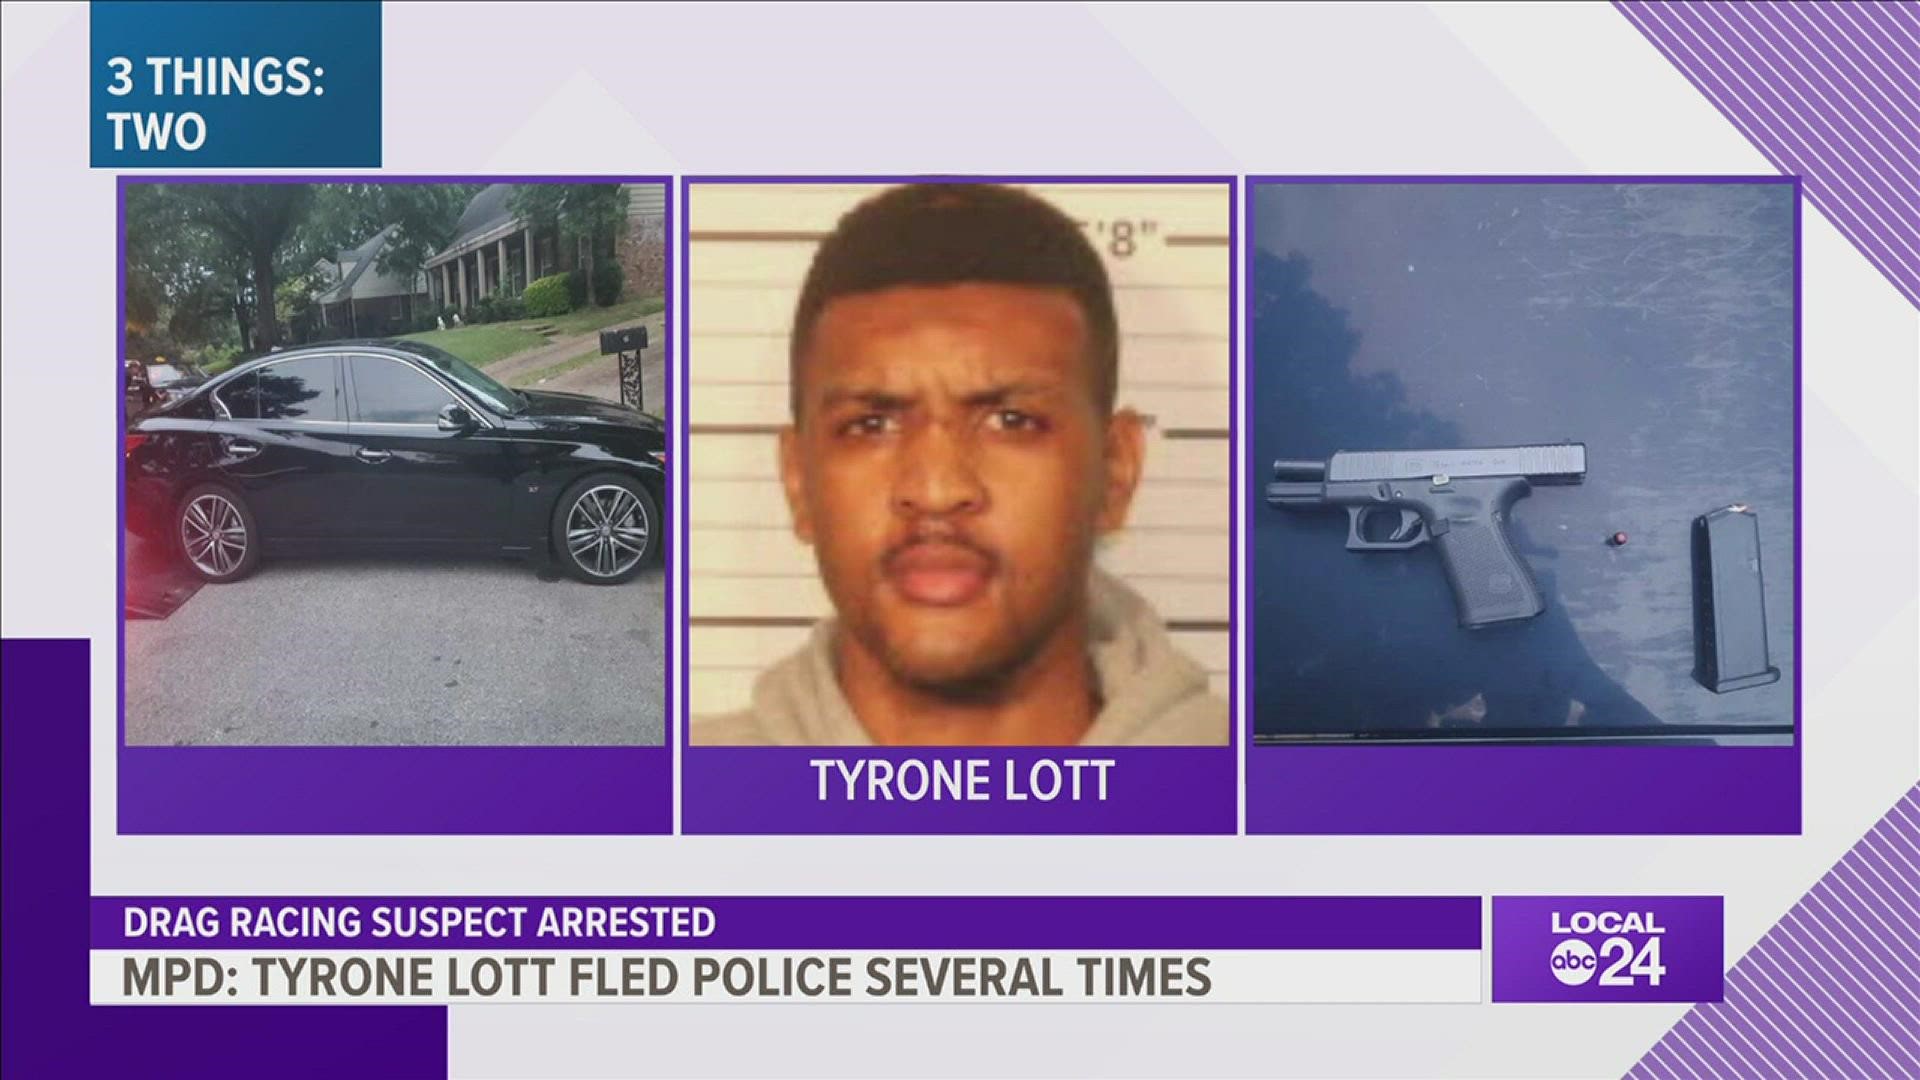 Tyrone Lott faces a long list of charges including drag racing, reckless driving, evading police, and more.